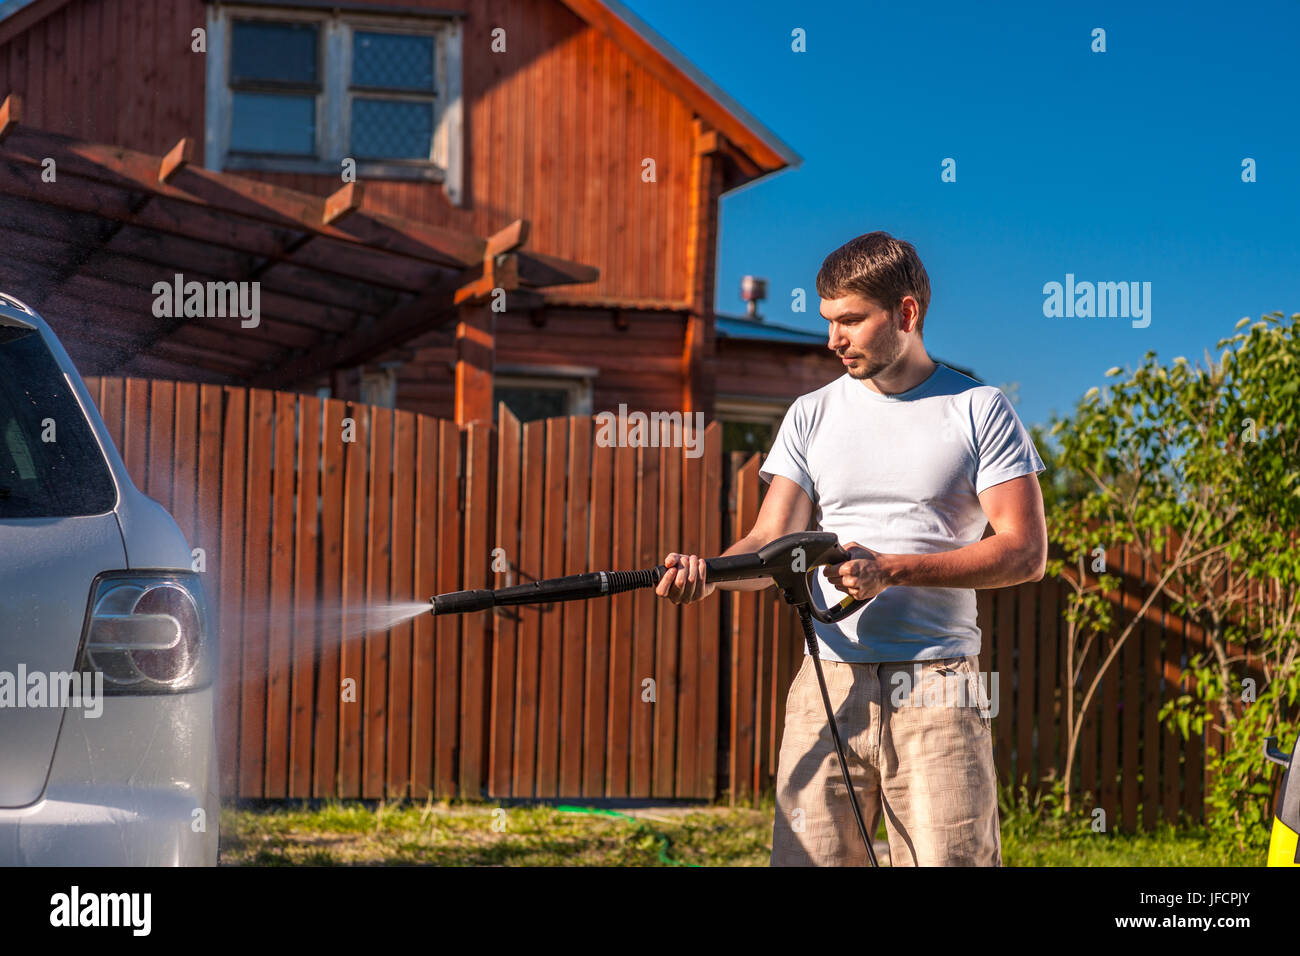 Man washing car in front of house Stock Photo